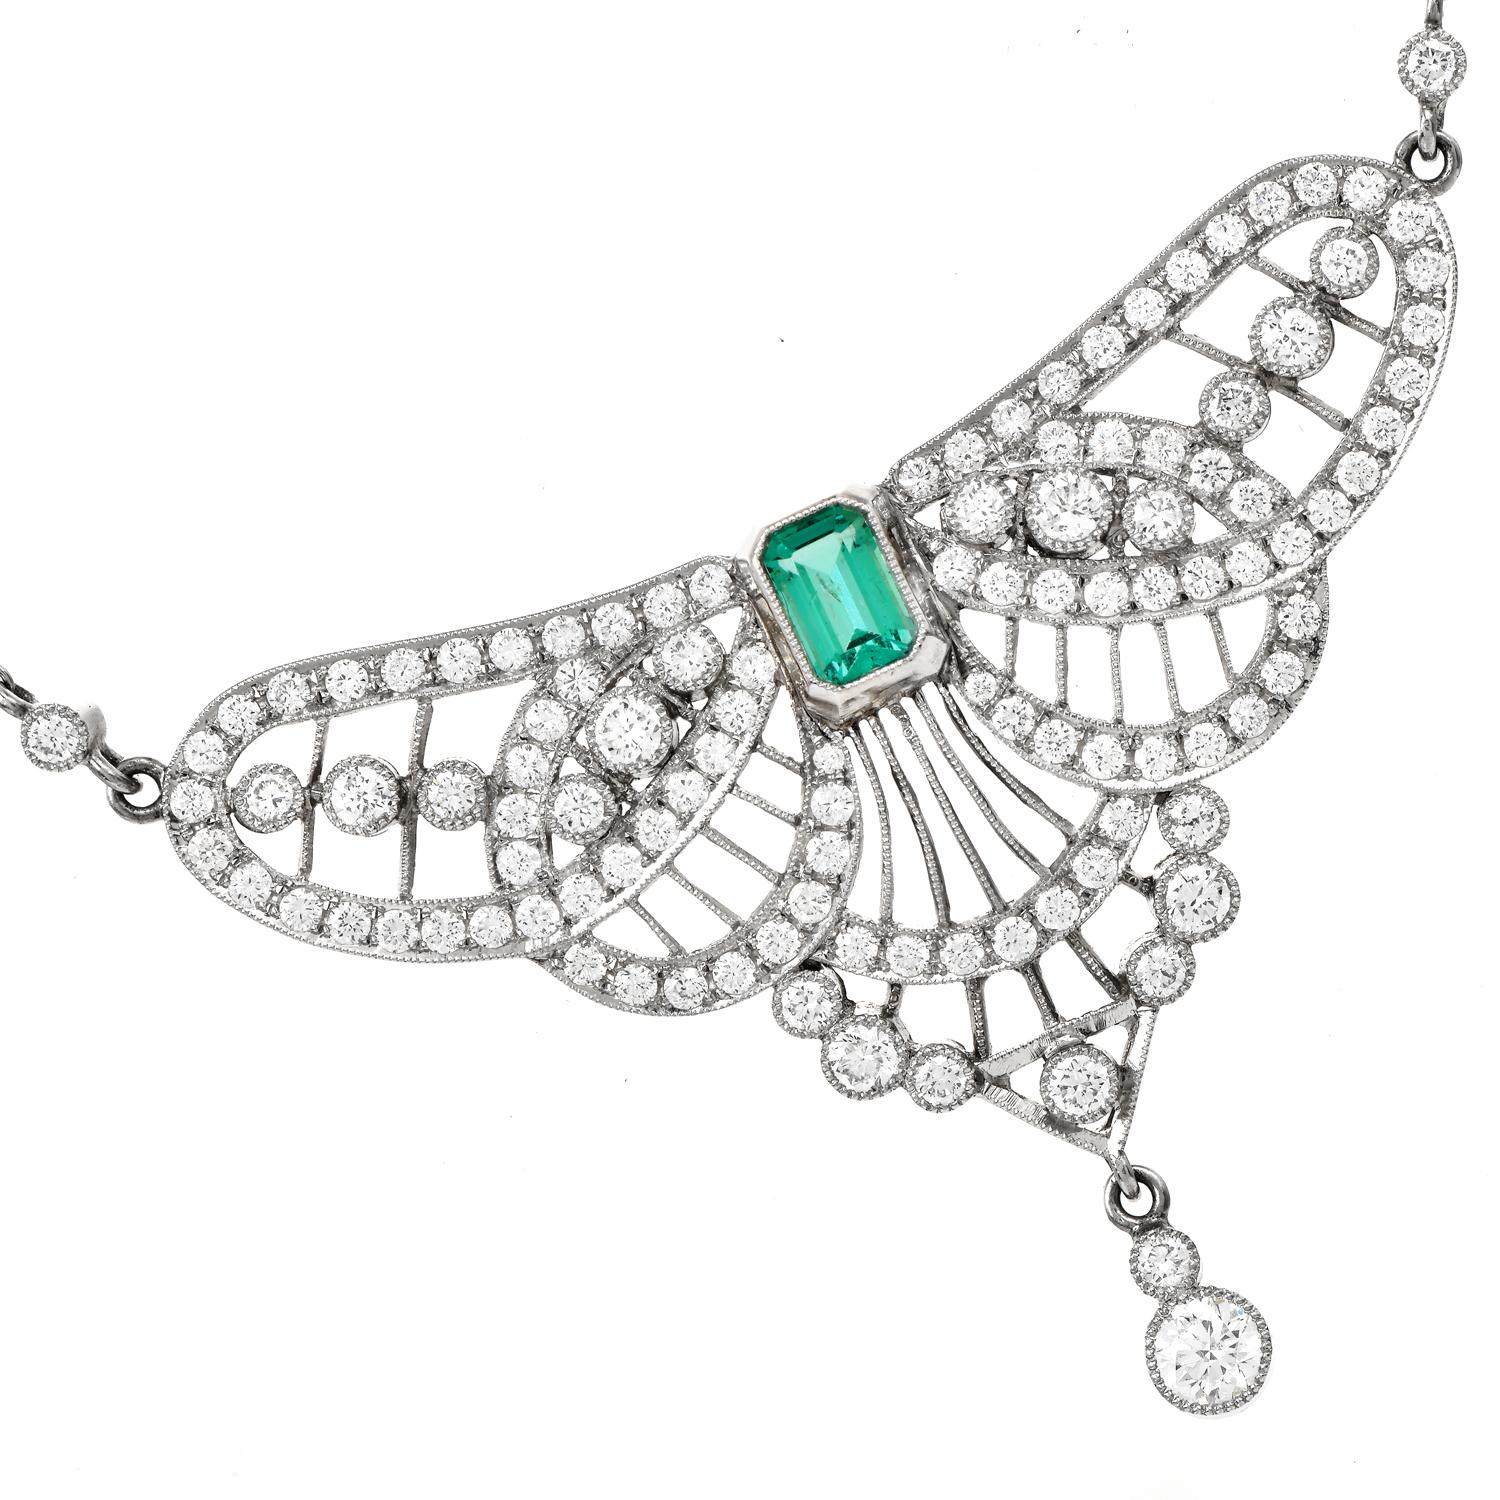 A romantic butterfly-inspired open-design pendant chain necklace.

It is crafted in solid platinum. Romantically designed with a drop pendant, & top centered by an exquisite Emerald, emerald-cut Shaped of approximately 0.60 carats, bezel set.

The